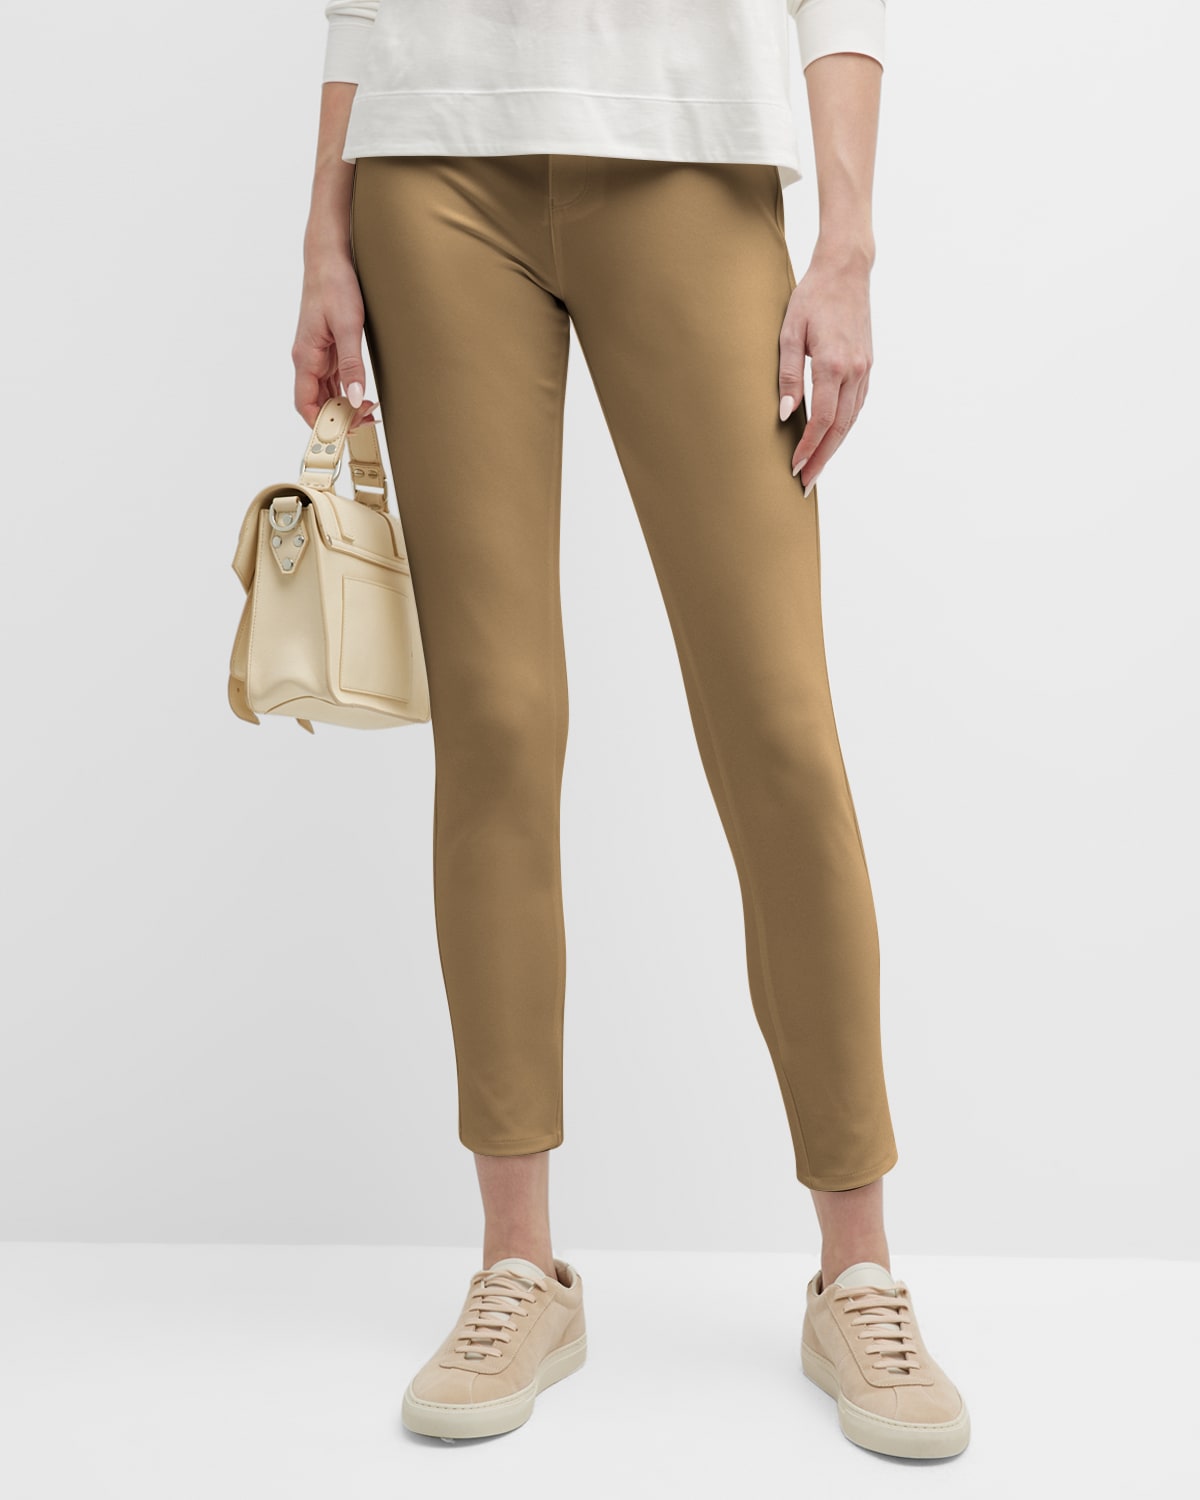 Shop Lafayette 148 Petite Mercer Acclaimed Stretch Skinny Pants In Cammello